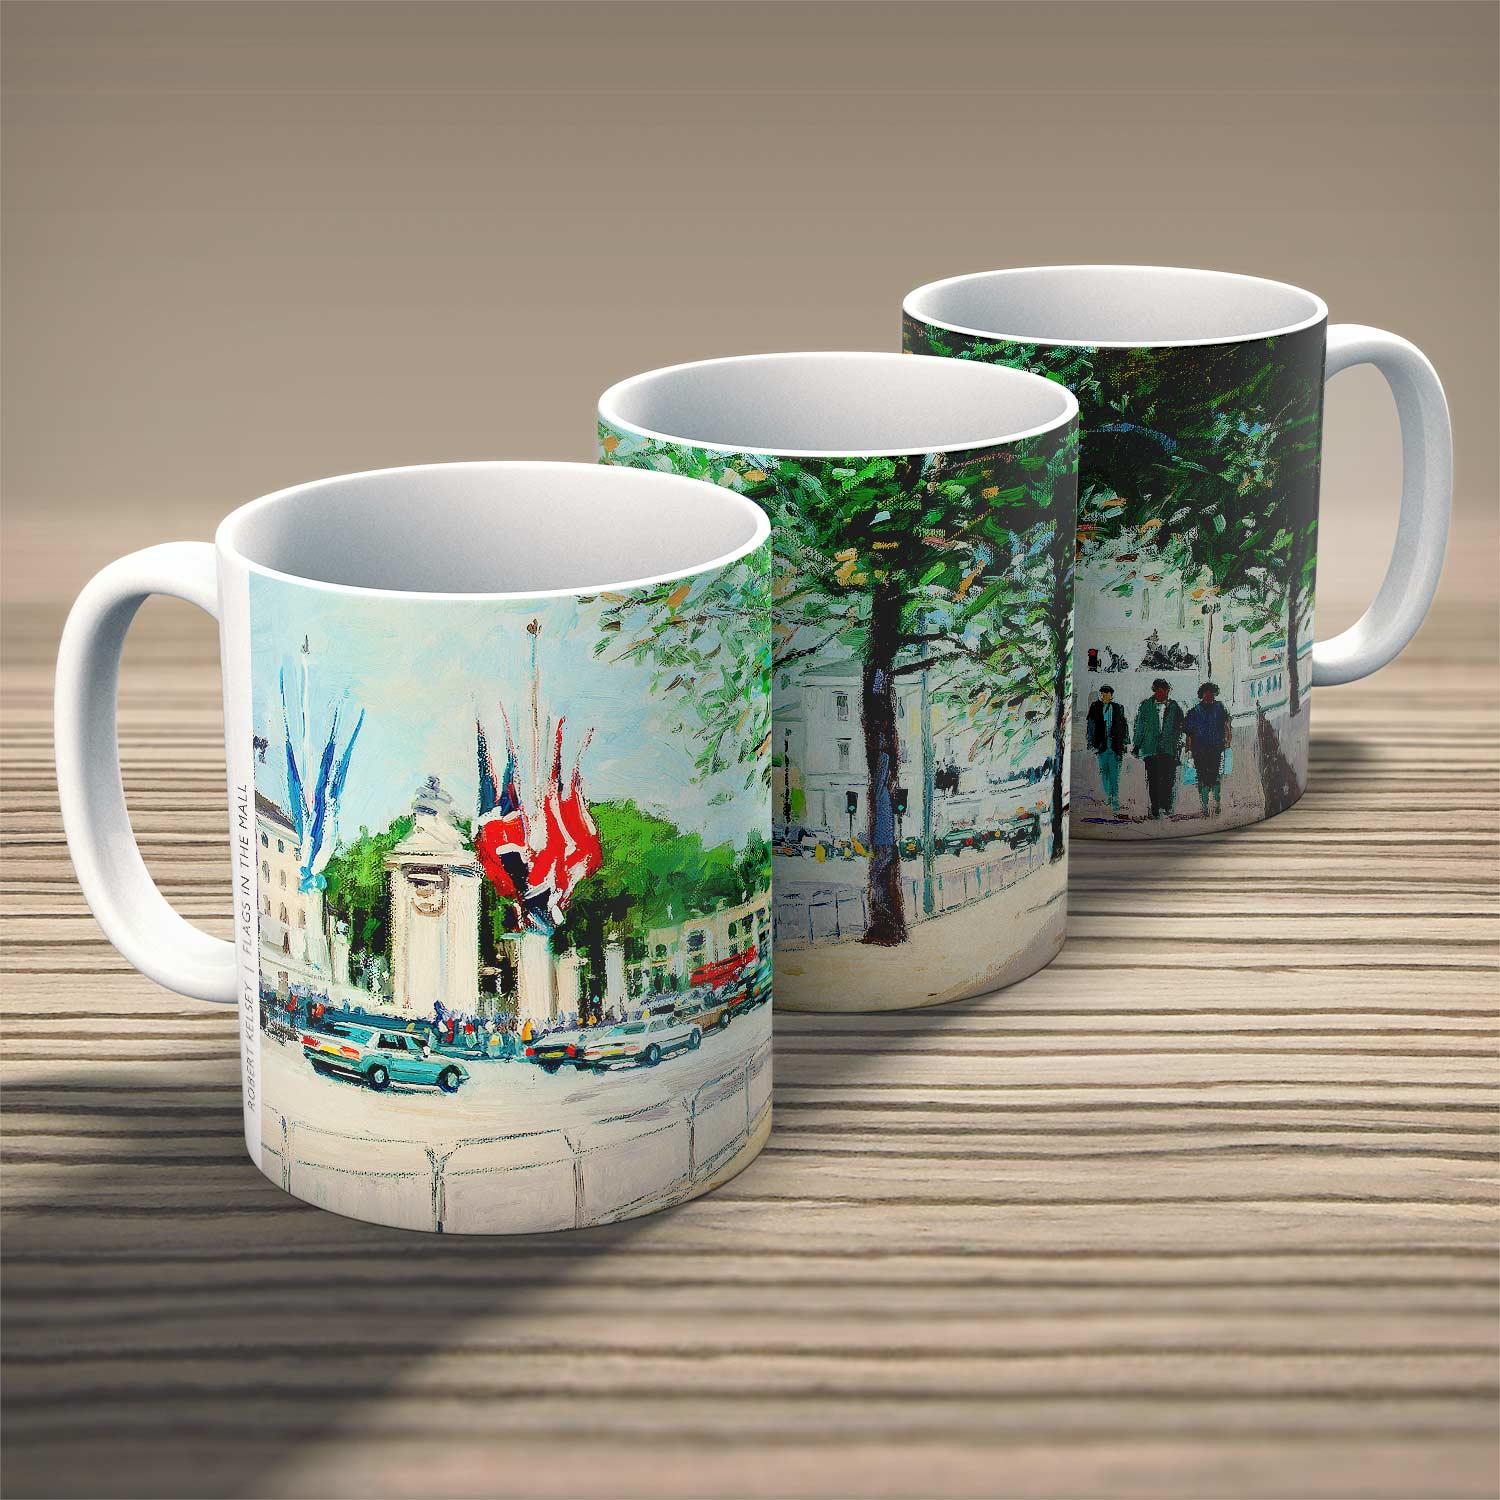 Flags in the Mall Mug from an original painting by artist Robert Kelsey